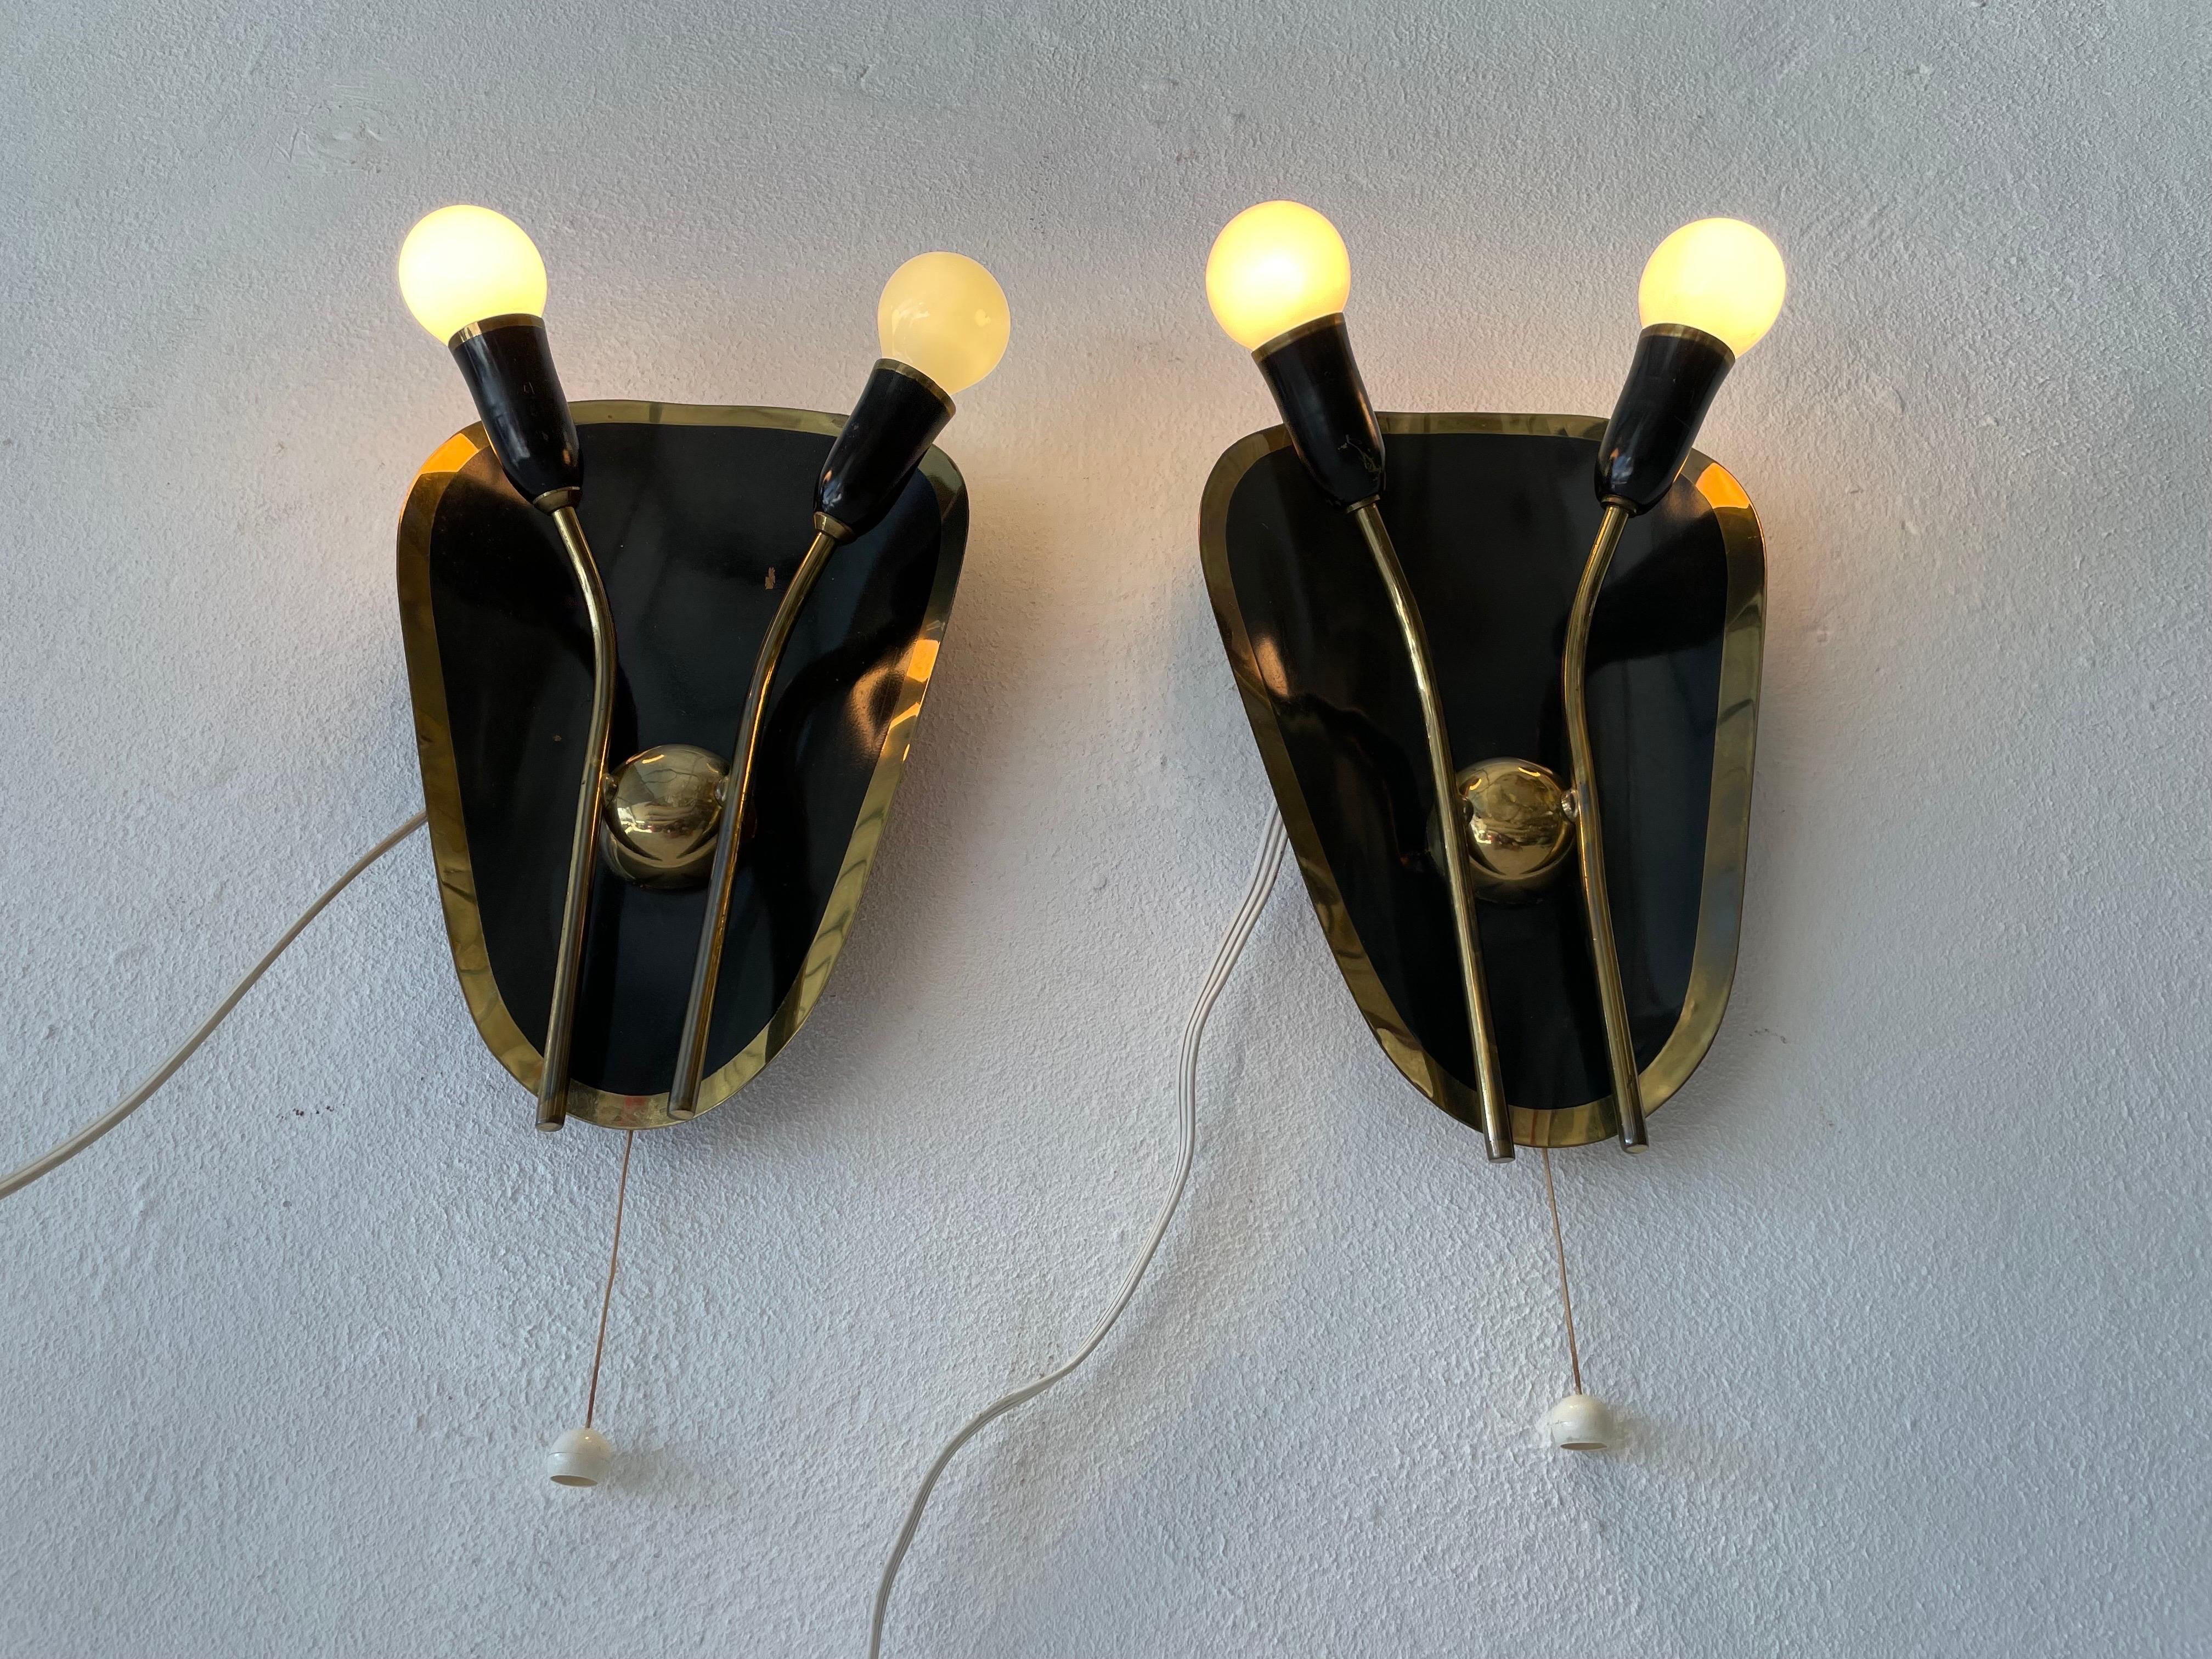 Exclusive Atomic Design Brass Black Metal Pair of Sconces, 1950s, Germany For Sale 8